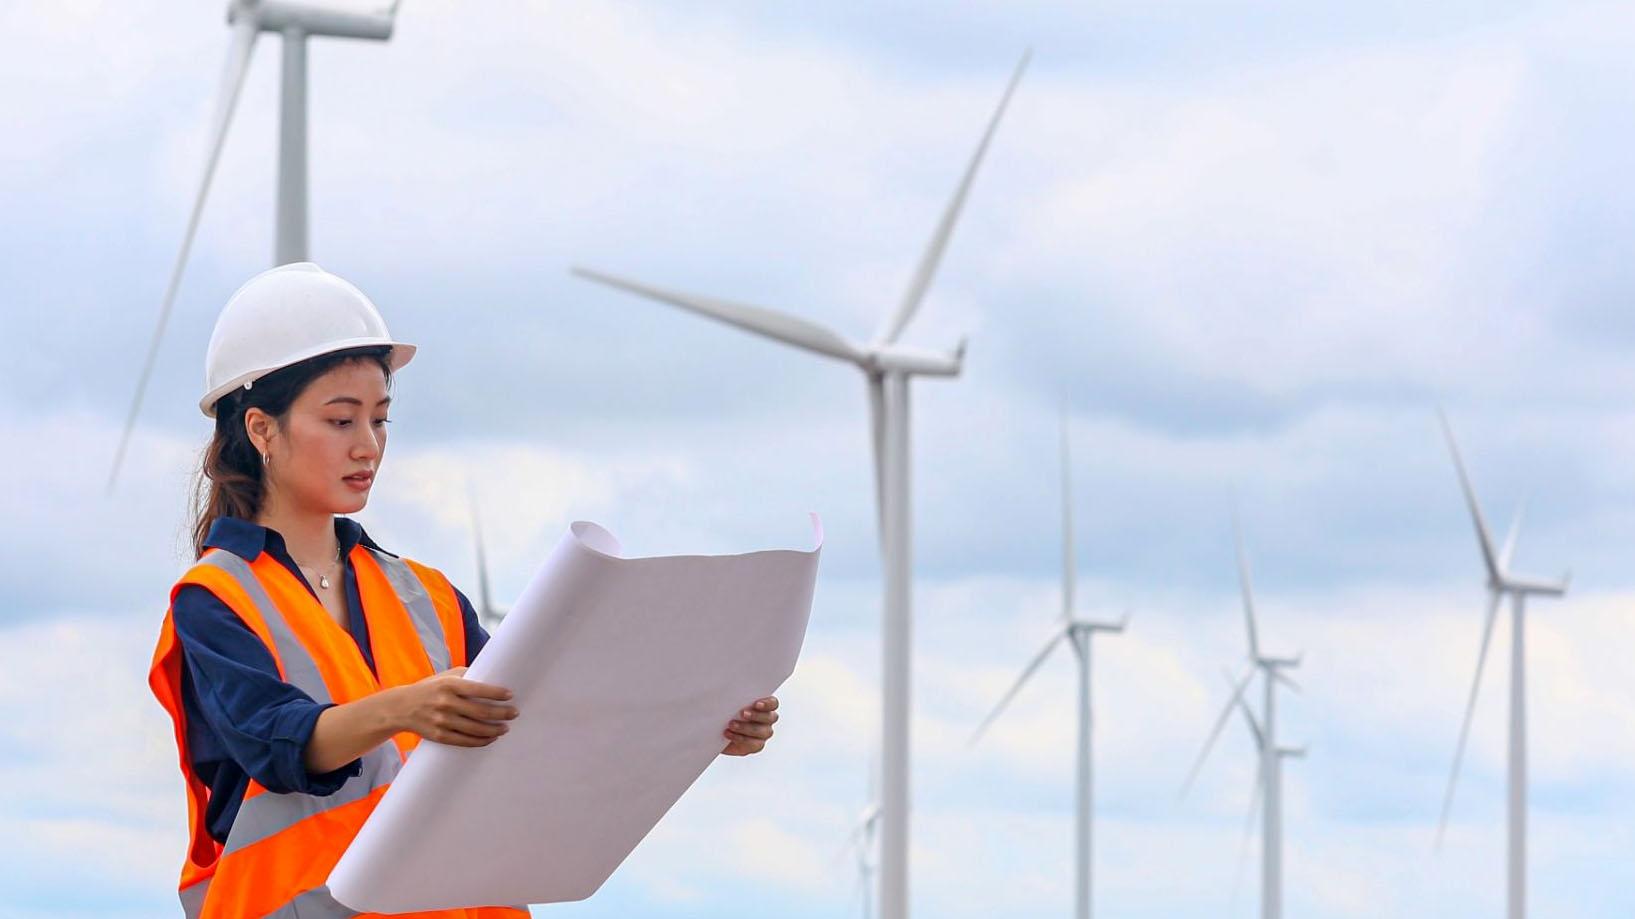 Image of woman looking at plans in front of wind turbines